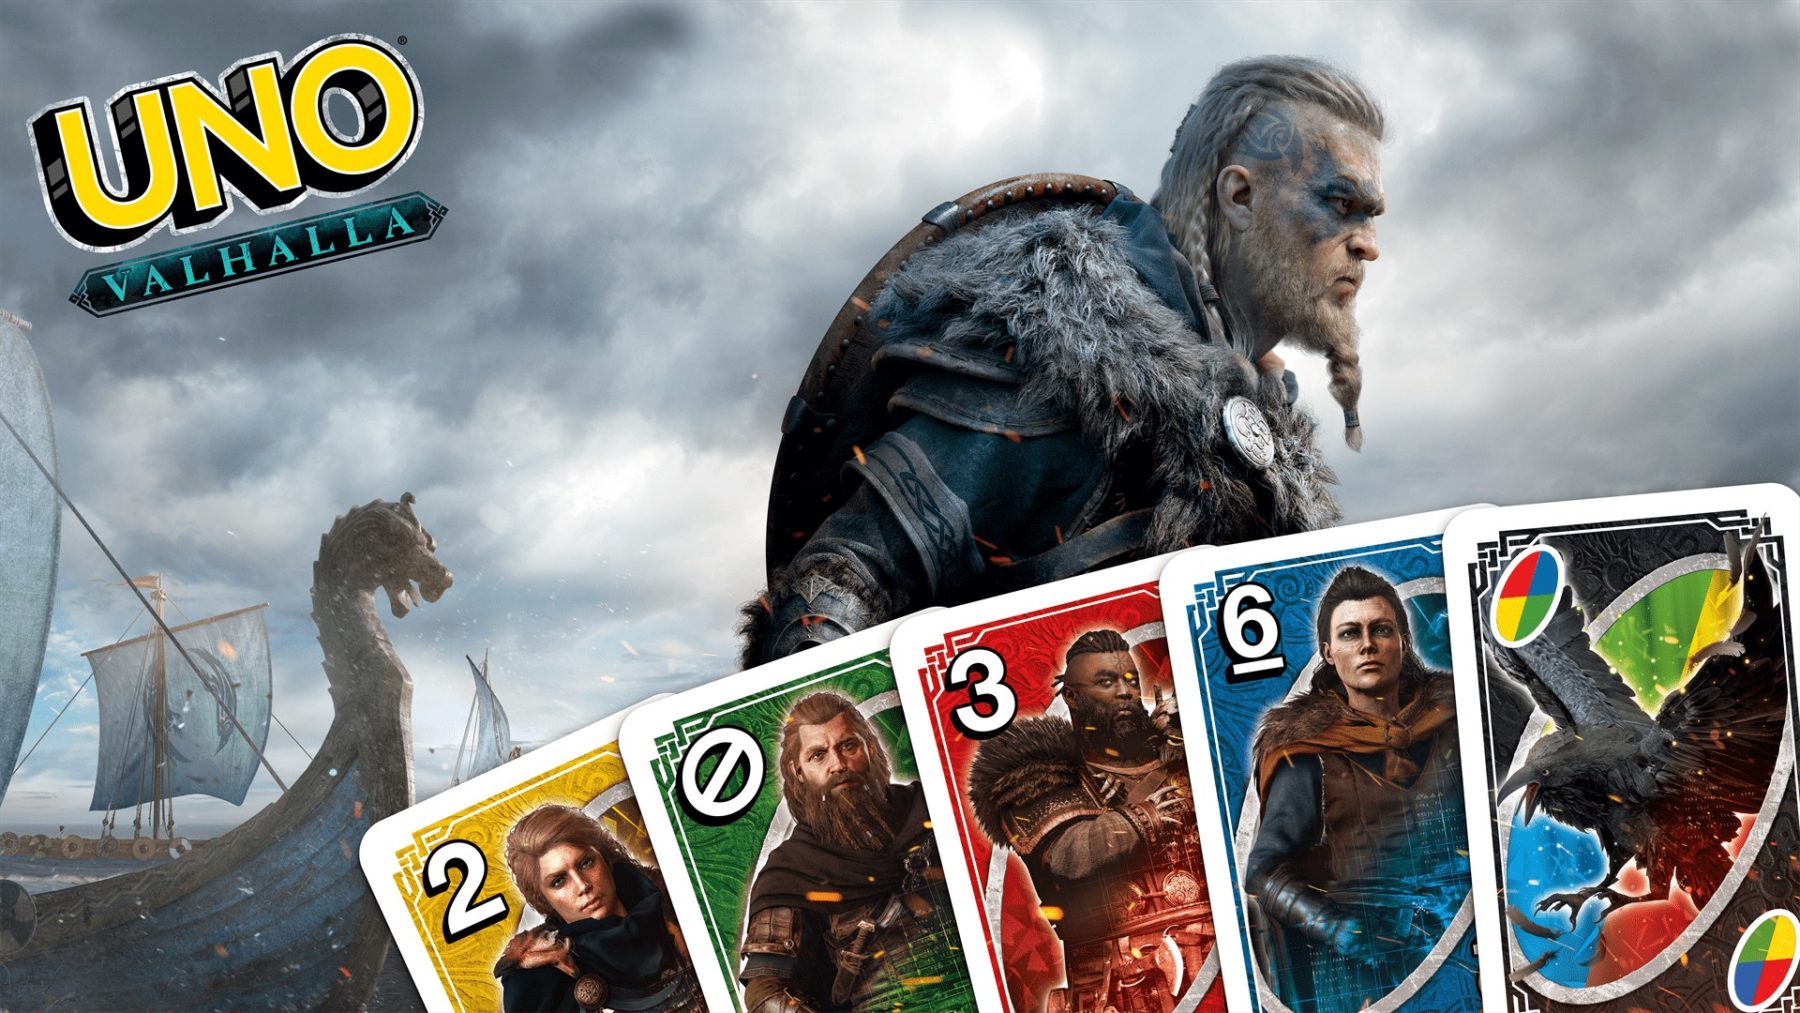 Play Cards like Vikings in the UNO Valhalla DLC, Available Today - returnal